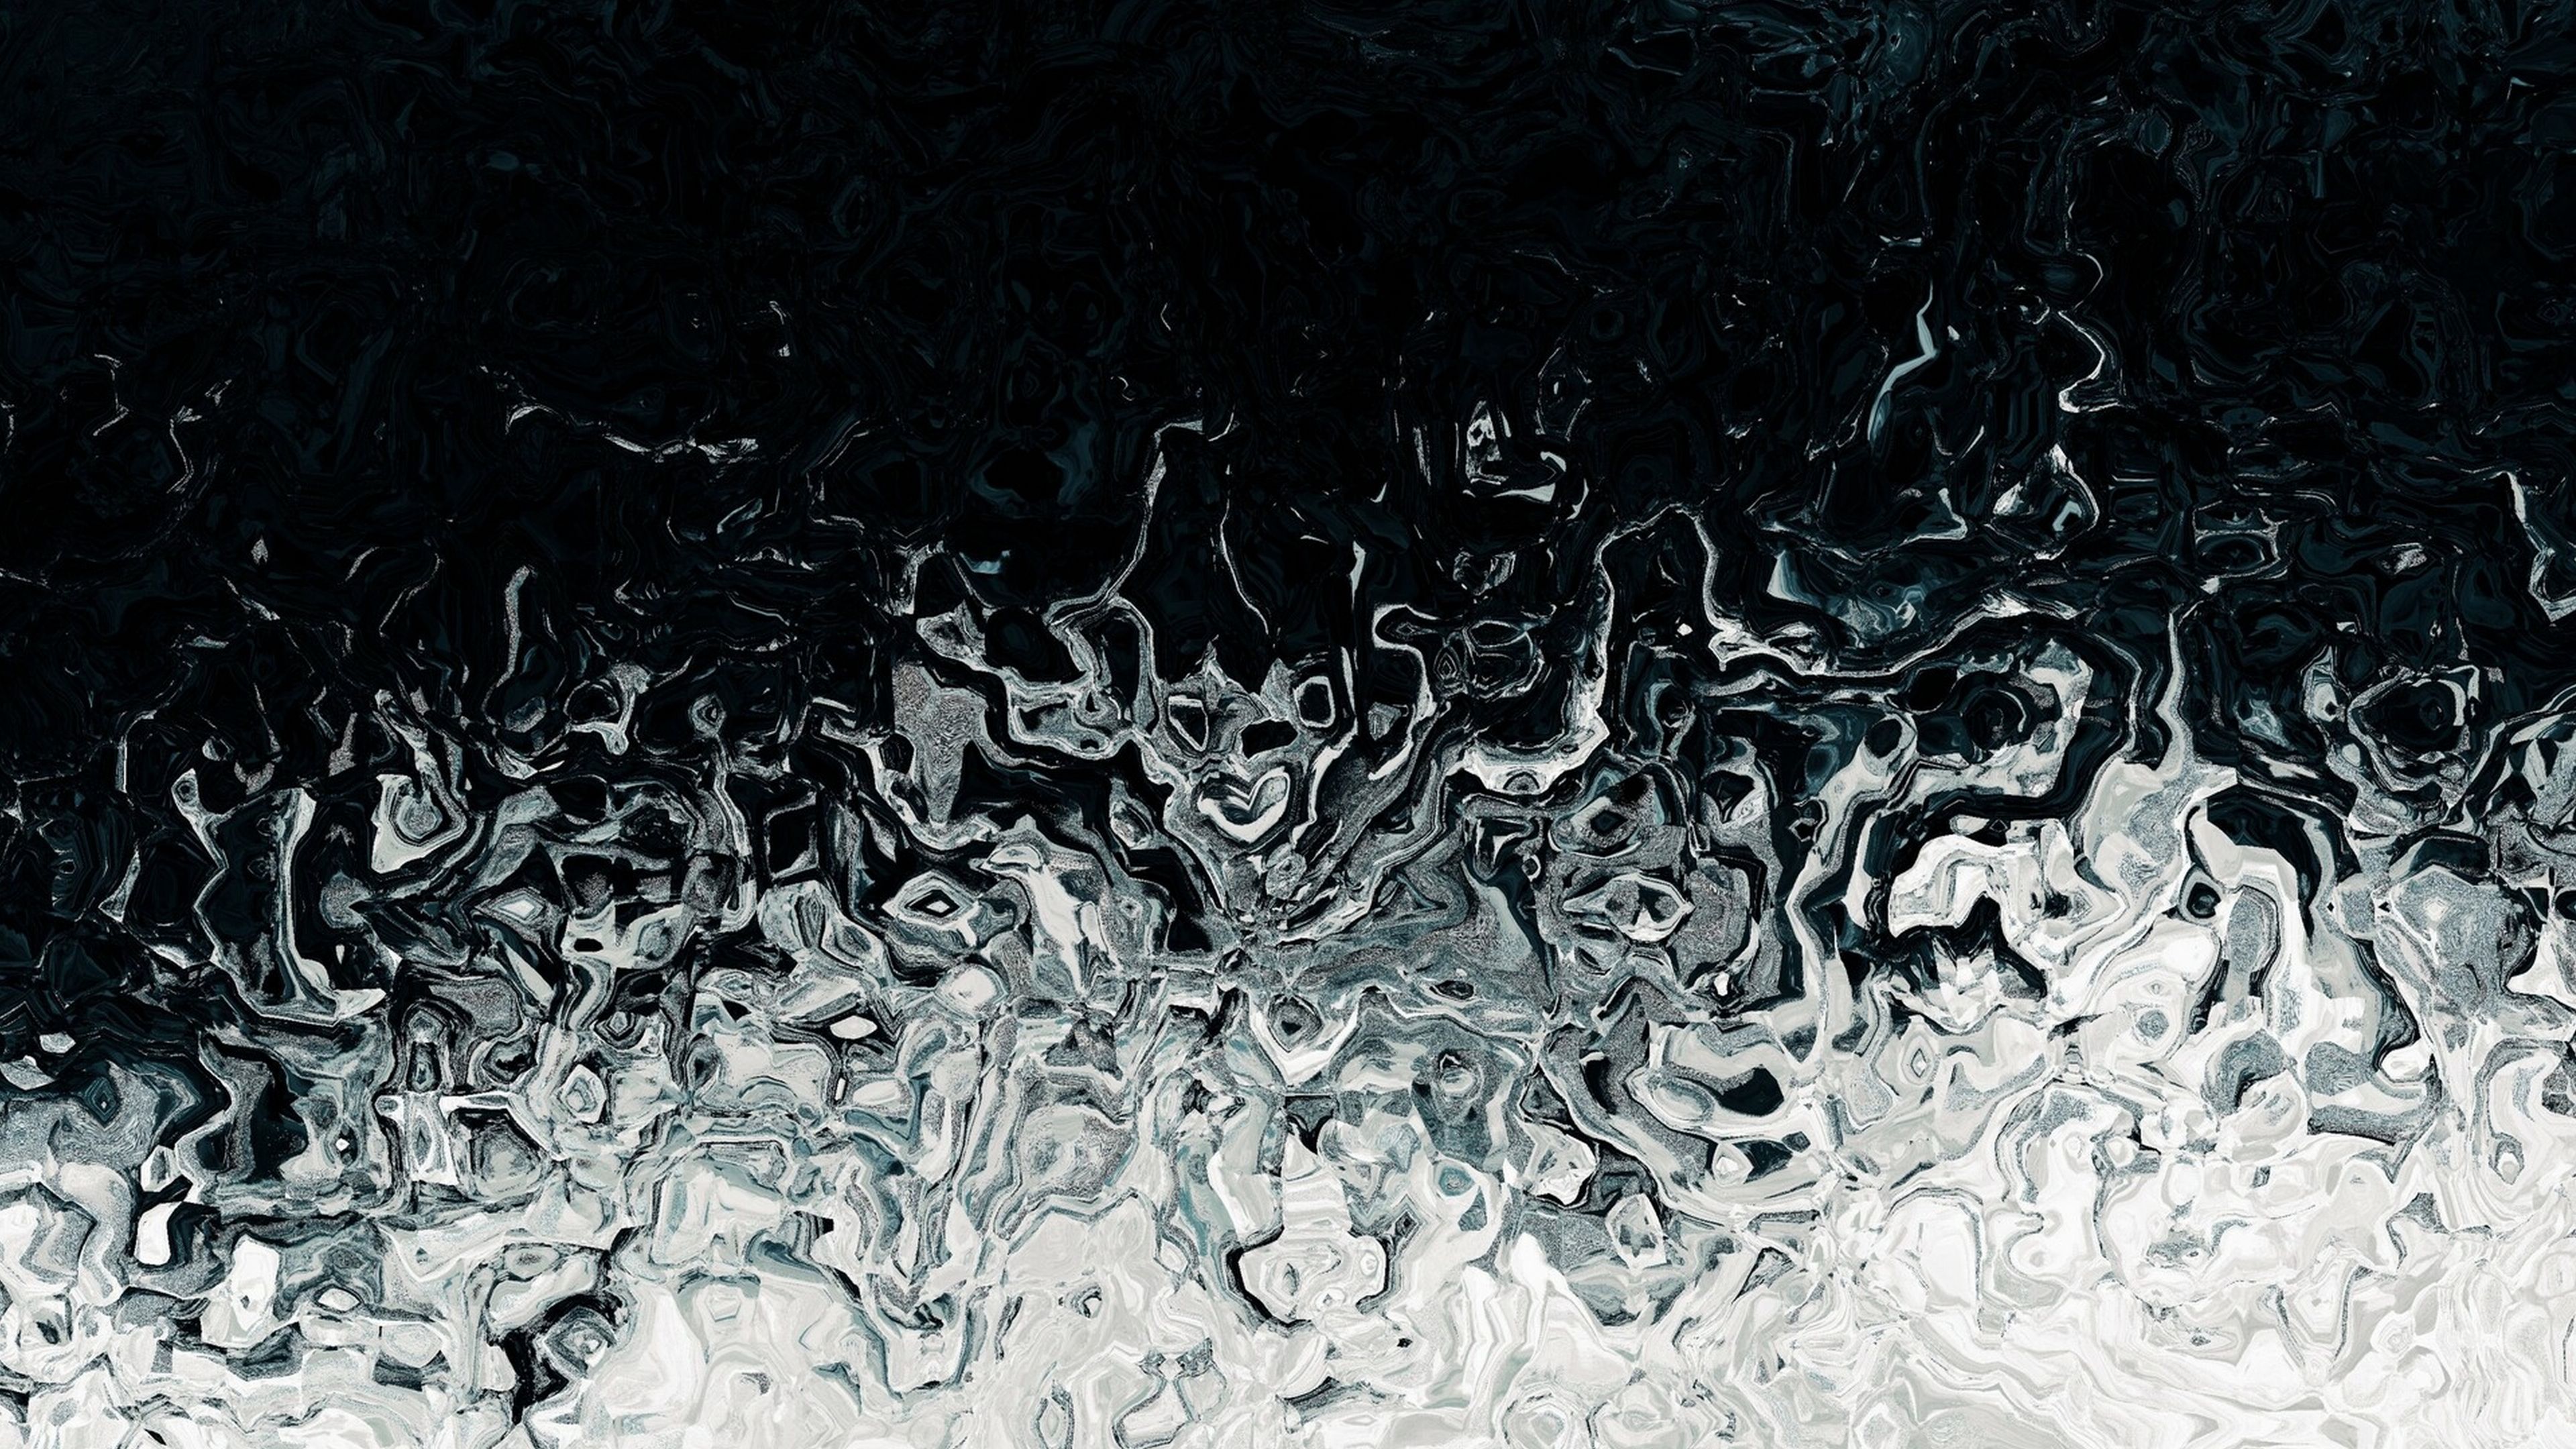 Download wallpaper 3840x2160 stains, liquid, abstraction, black, white 4k uhd 16:9 HD background